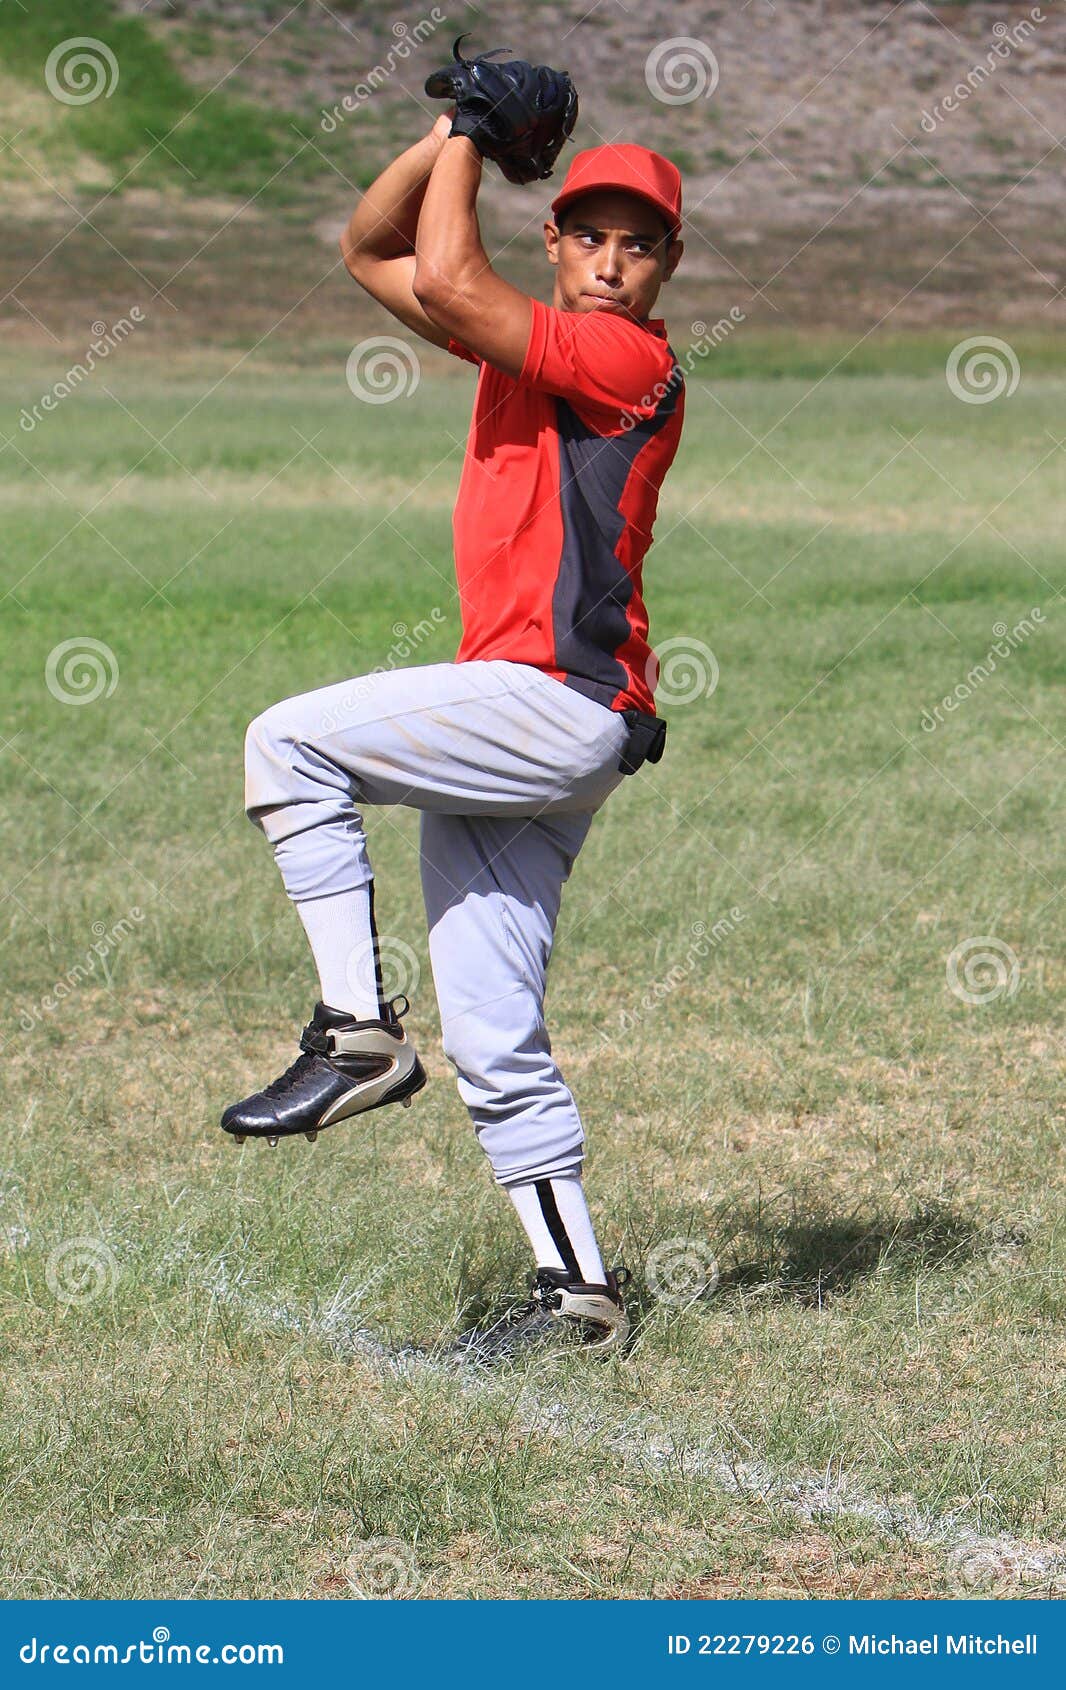 baseball pitcher winds up to throw the ball